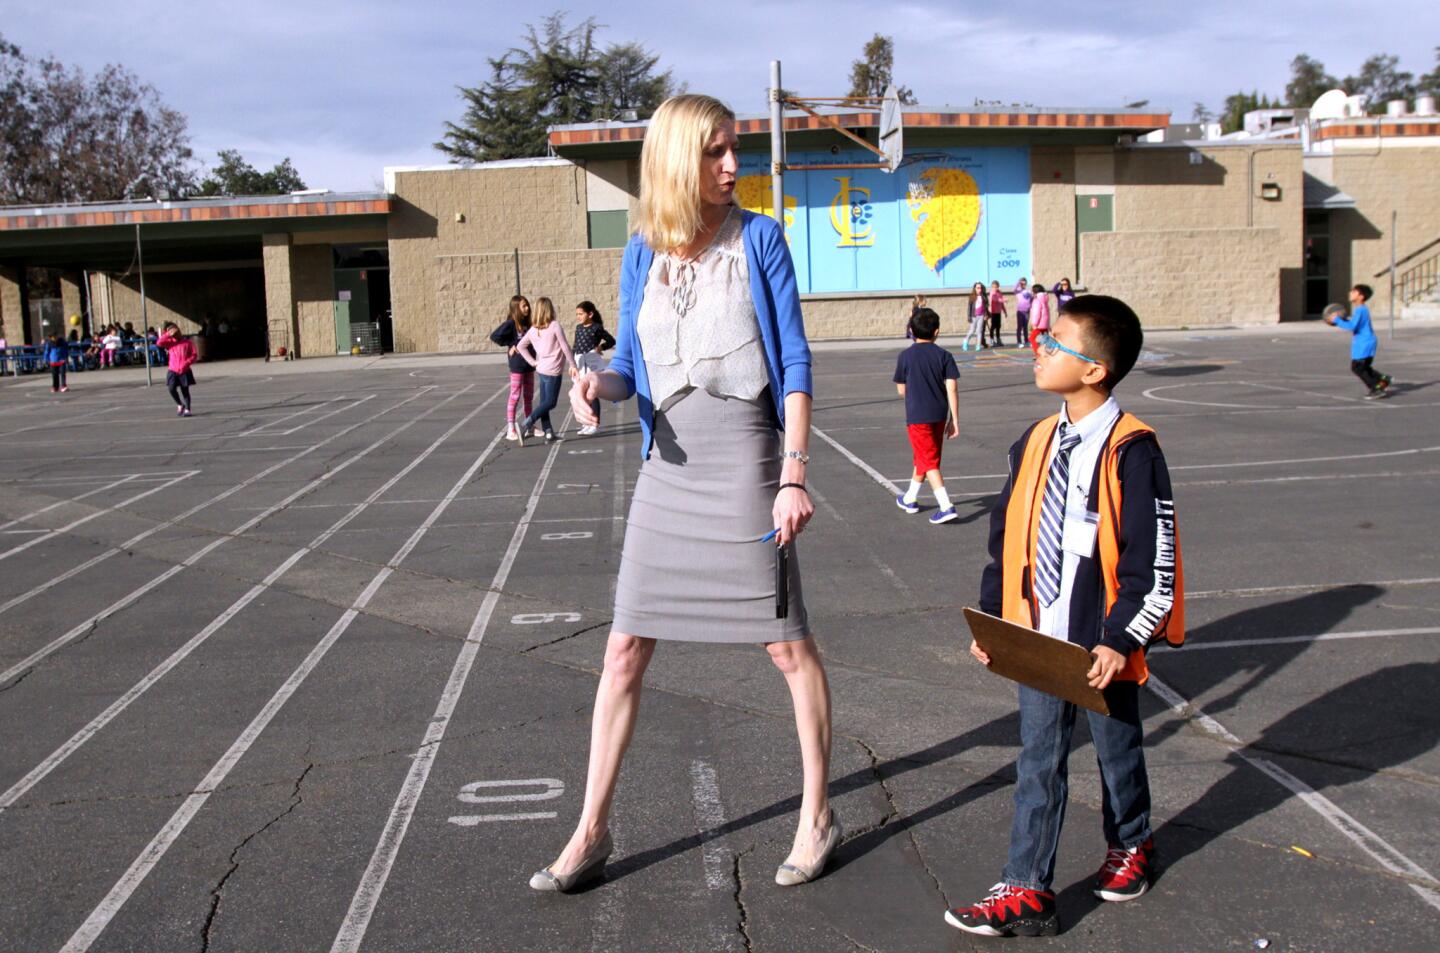 La Cañada Elementary School Principal Emily Blaney, left, and the "Principal for a Day" Michael Kwan walk the school yard during recess.